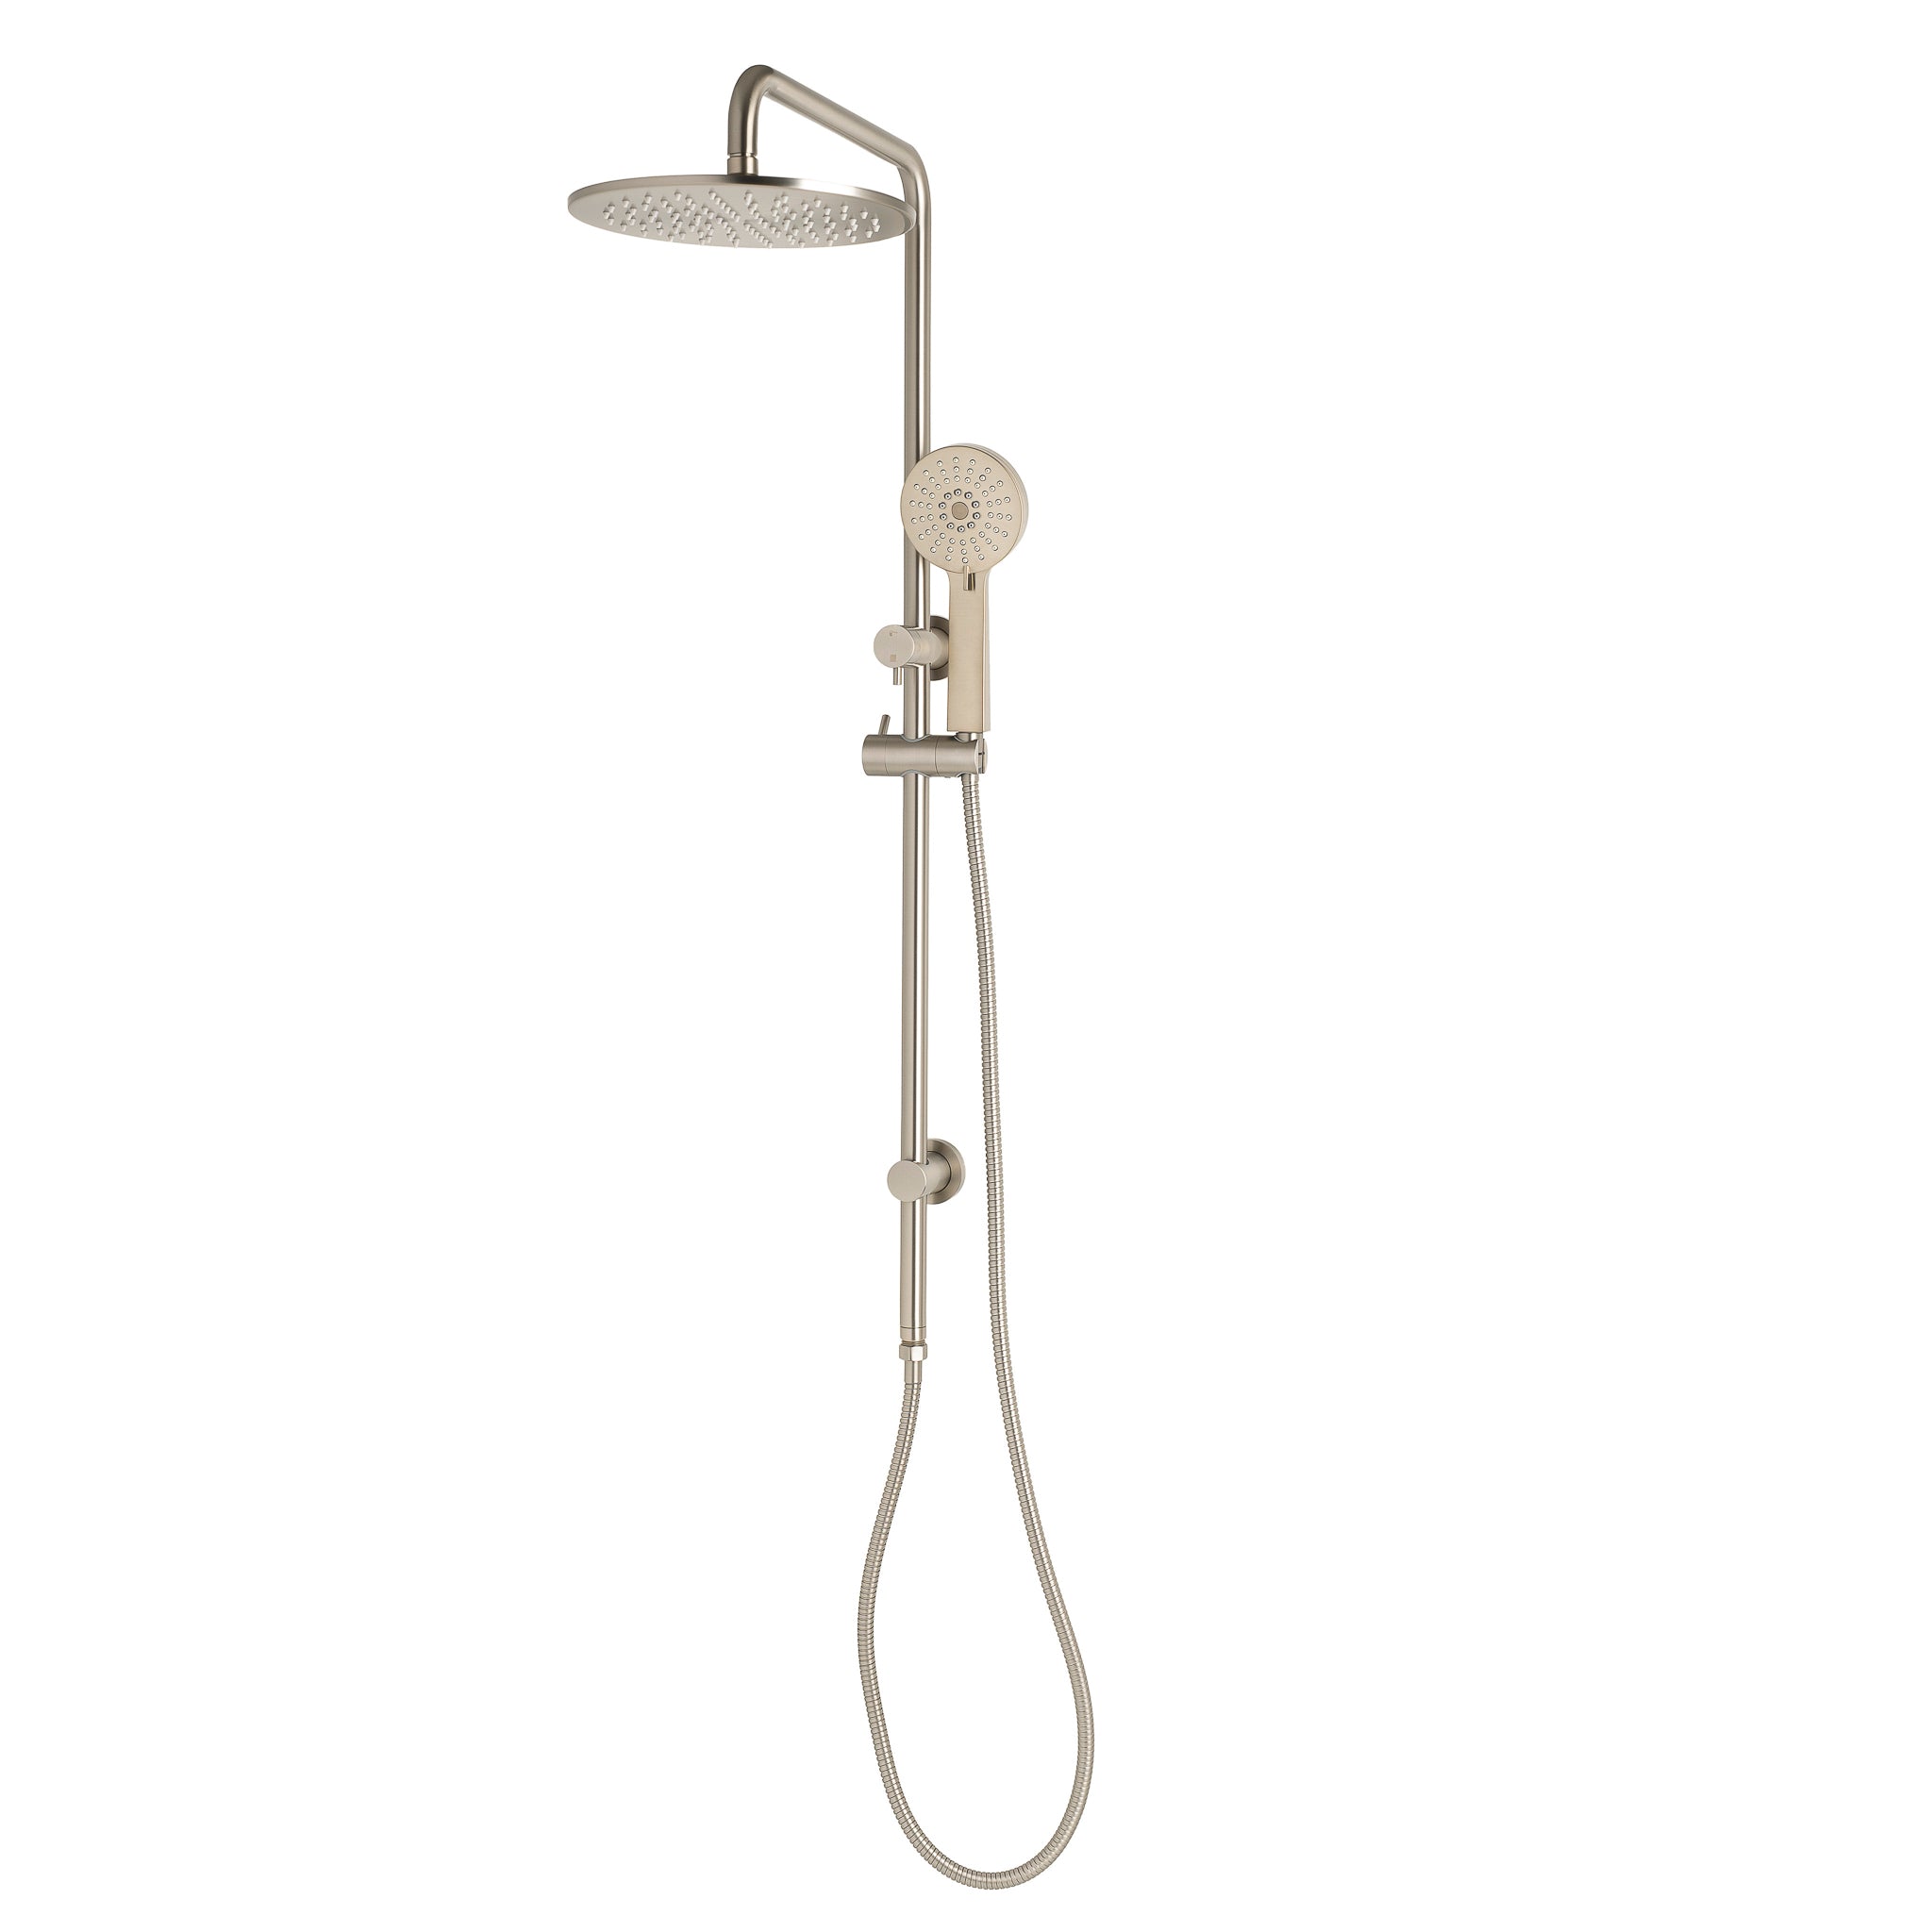 Profile Round Twin Shower System with Adjustable Rail and 250mm Head, Brushed Nickel